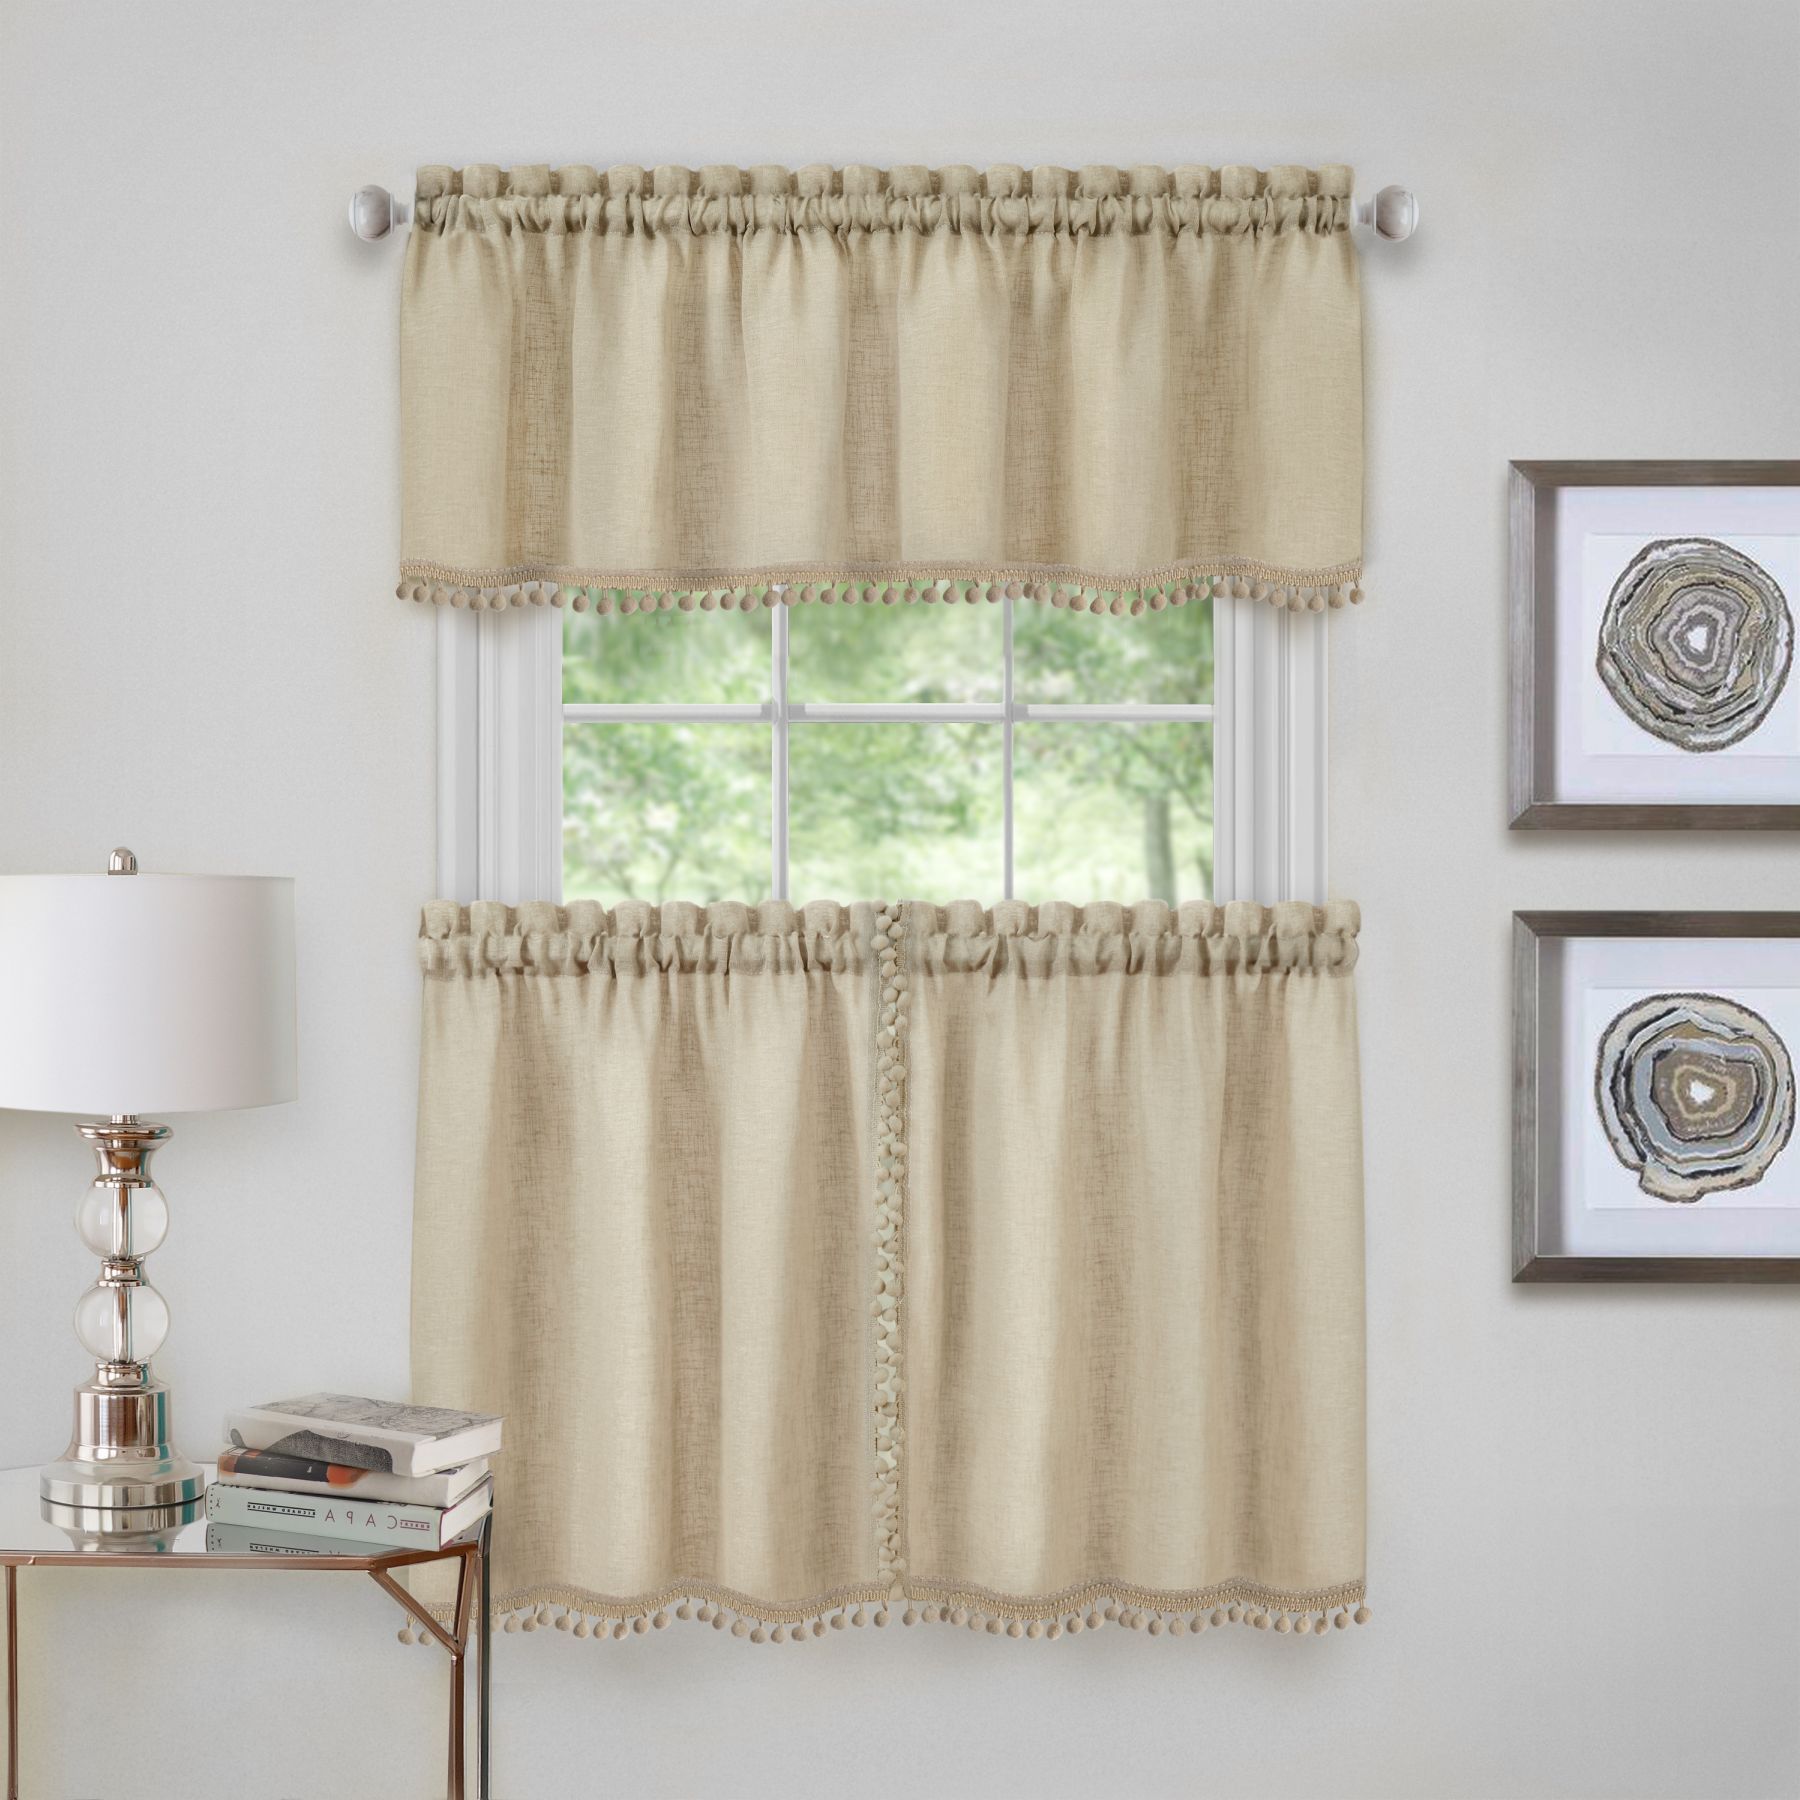 Traditional Elegance Olivia Window Kitchen Curtain Tier Pair With Oakwood Linen Style Decorative Window Curtain Tier Sets (View 20 of 20)